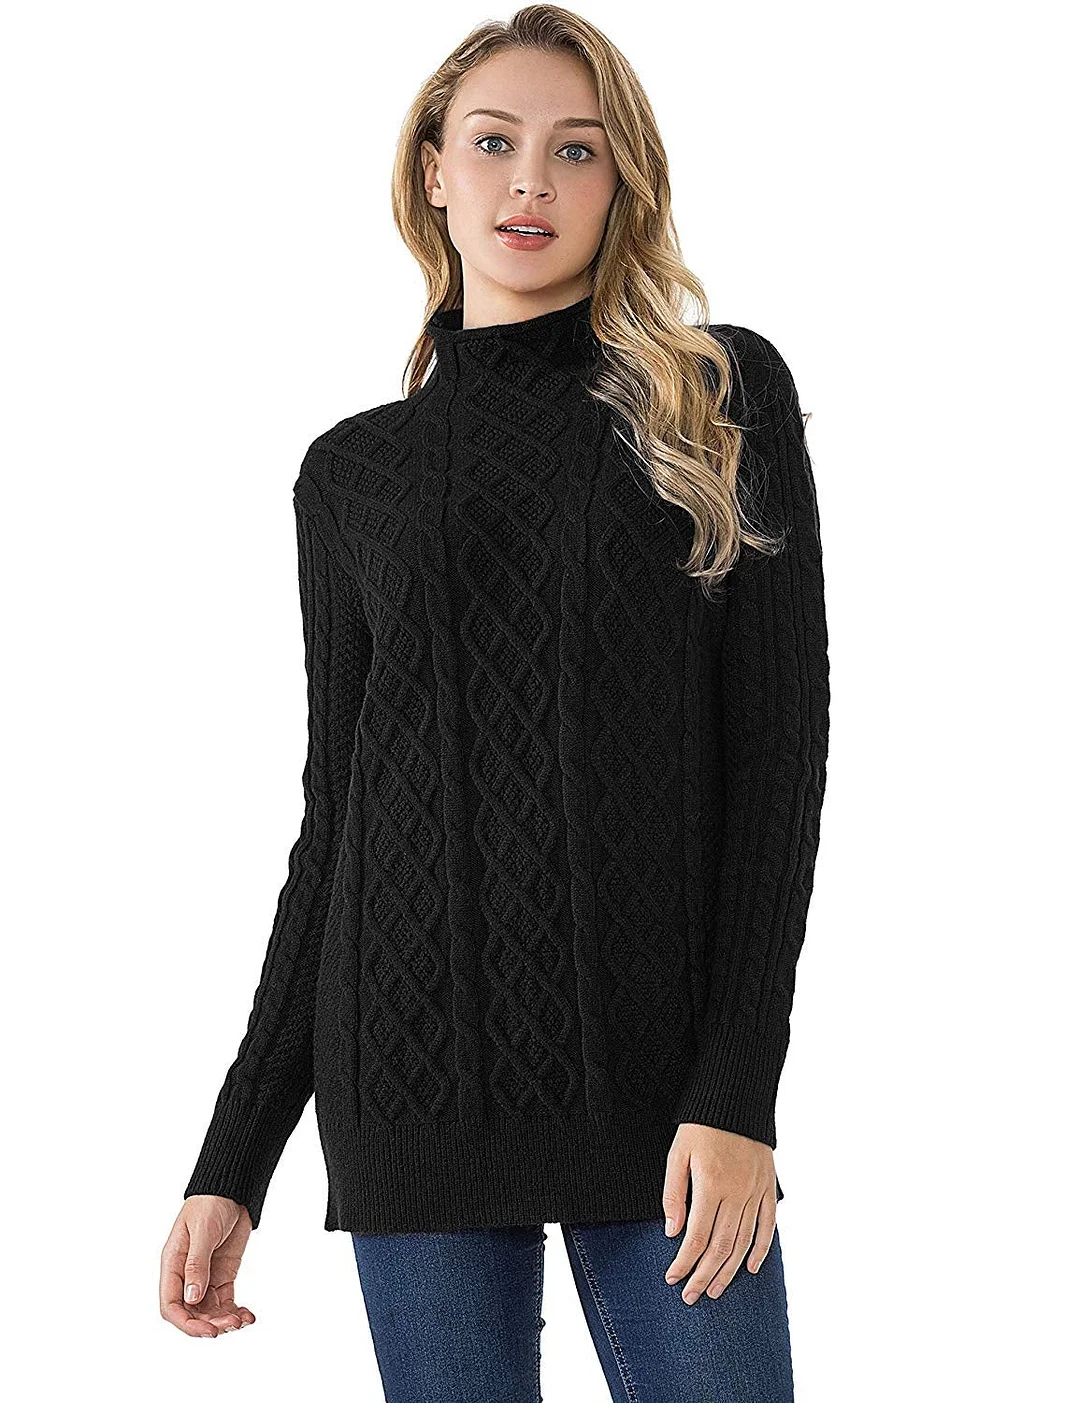 Women's Tunic Sweater Cable Knit Mock Neck Pullover Long Sweater Tops